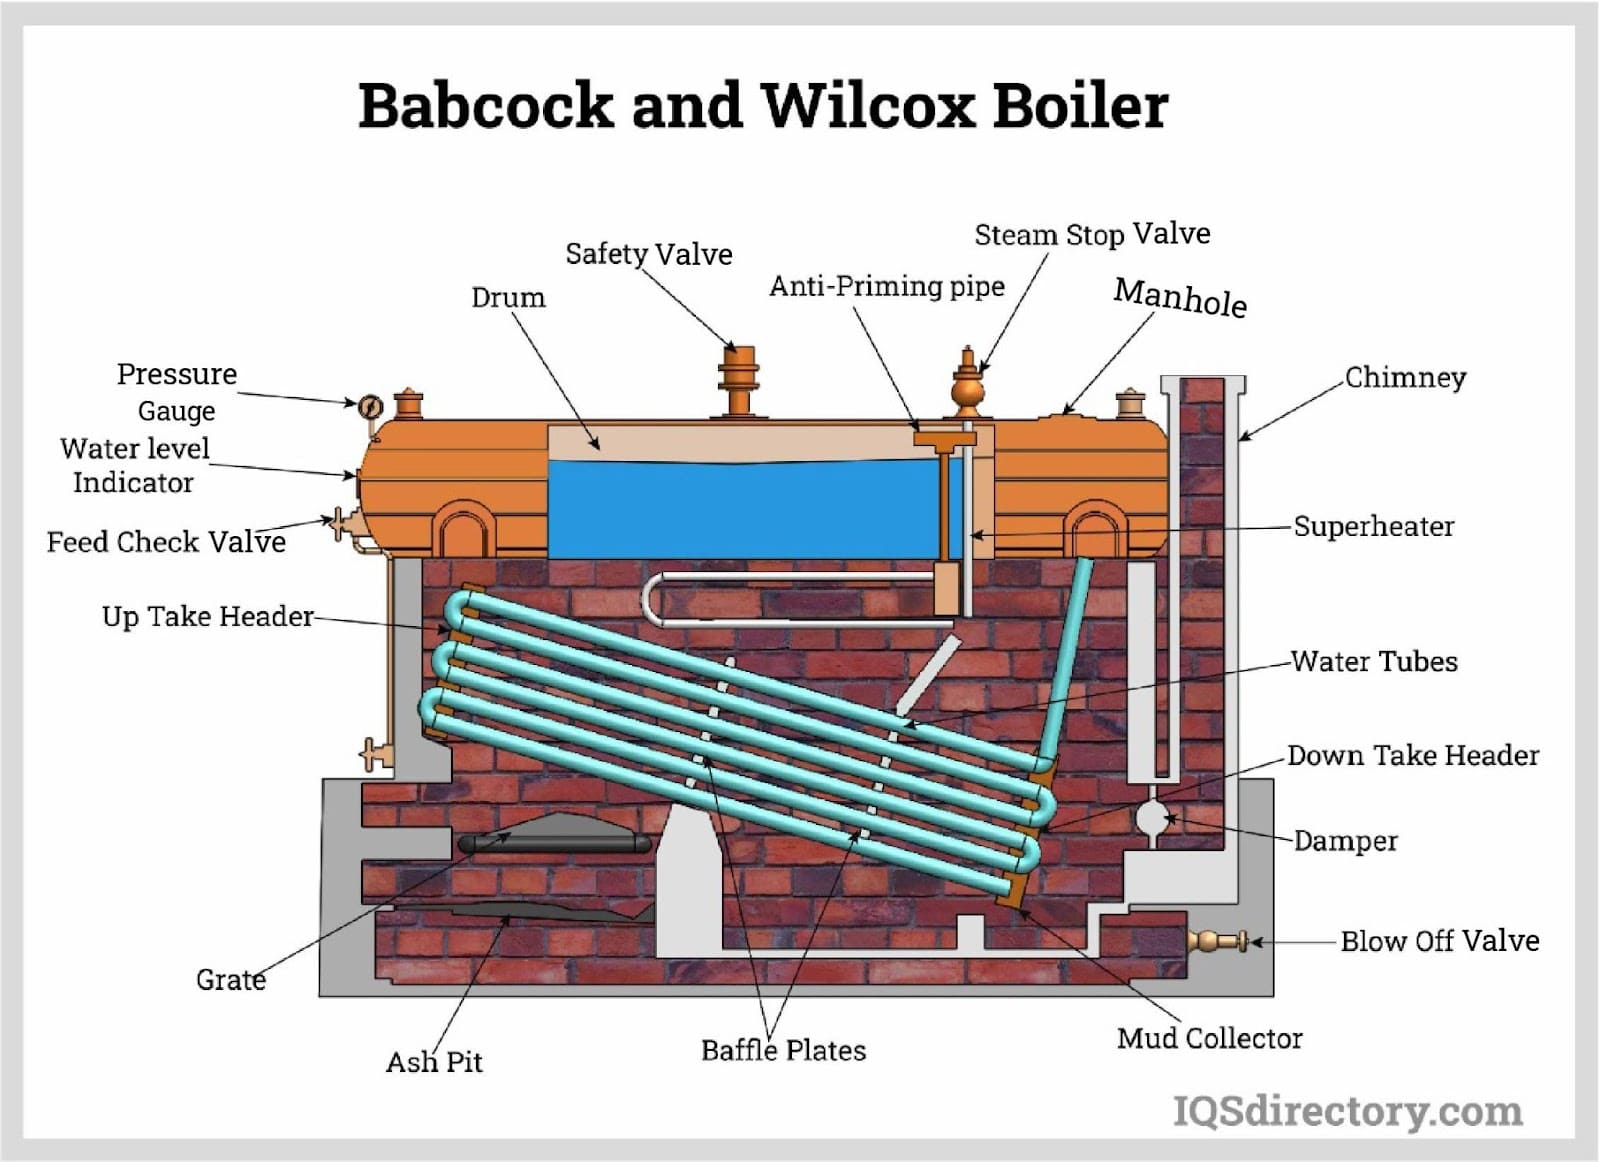 Babcock and Wilcox Boiler